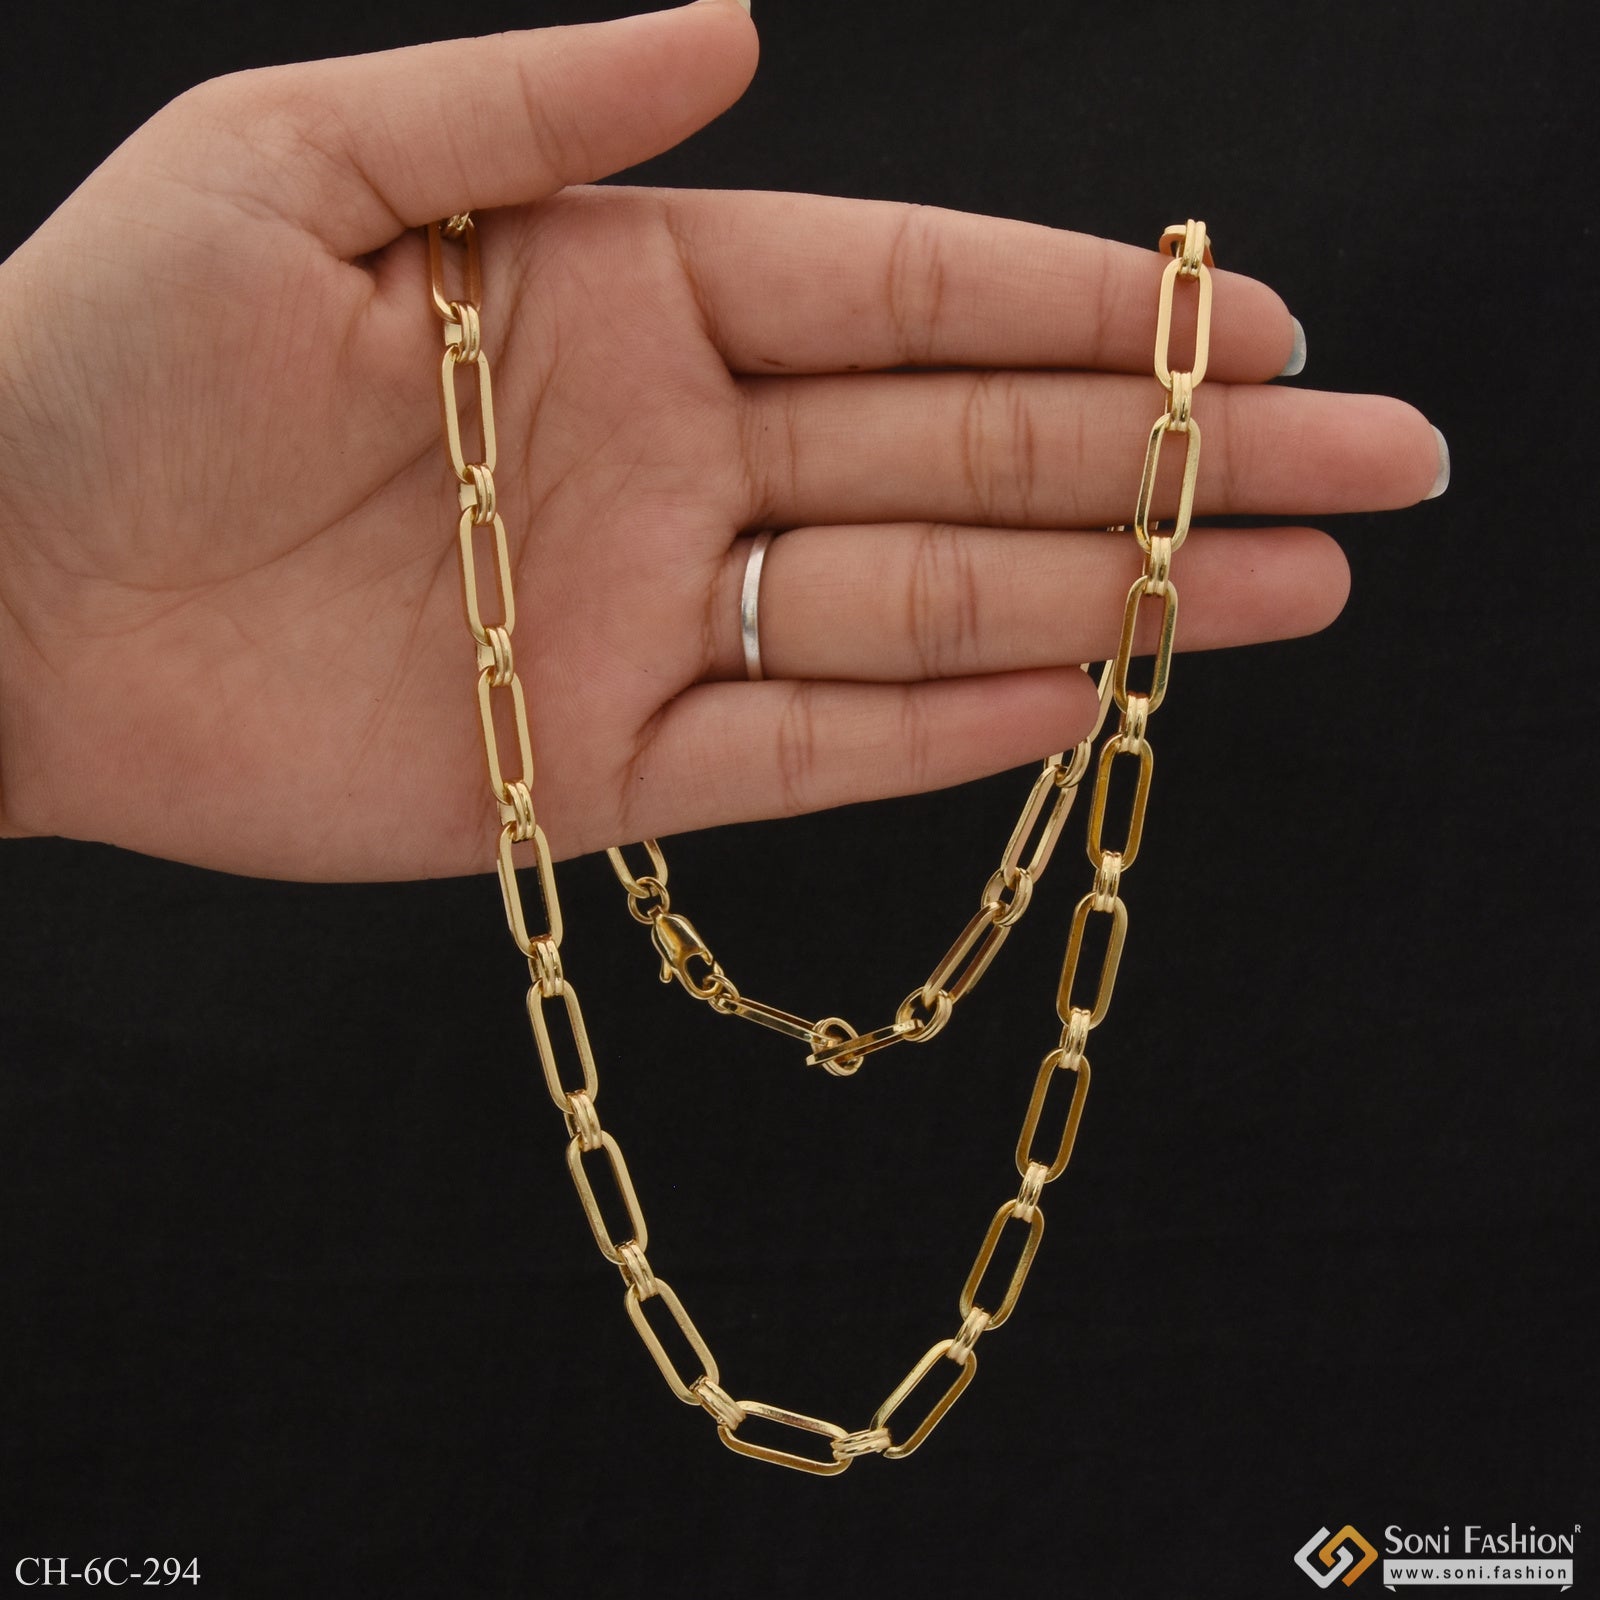 Artisanal Design Superior Quality Hand-Finished Design Chain for Men - Style C294